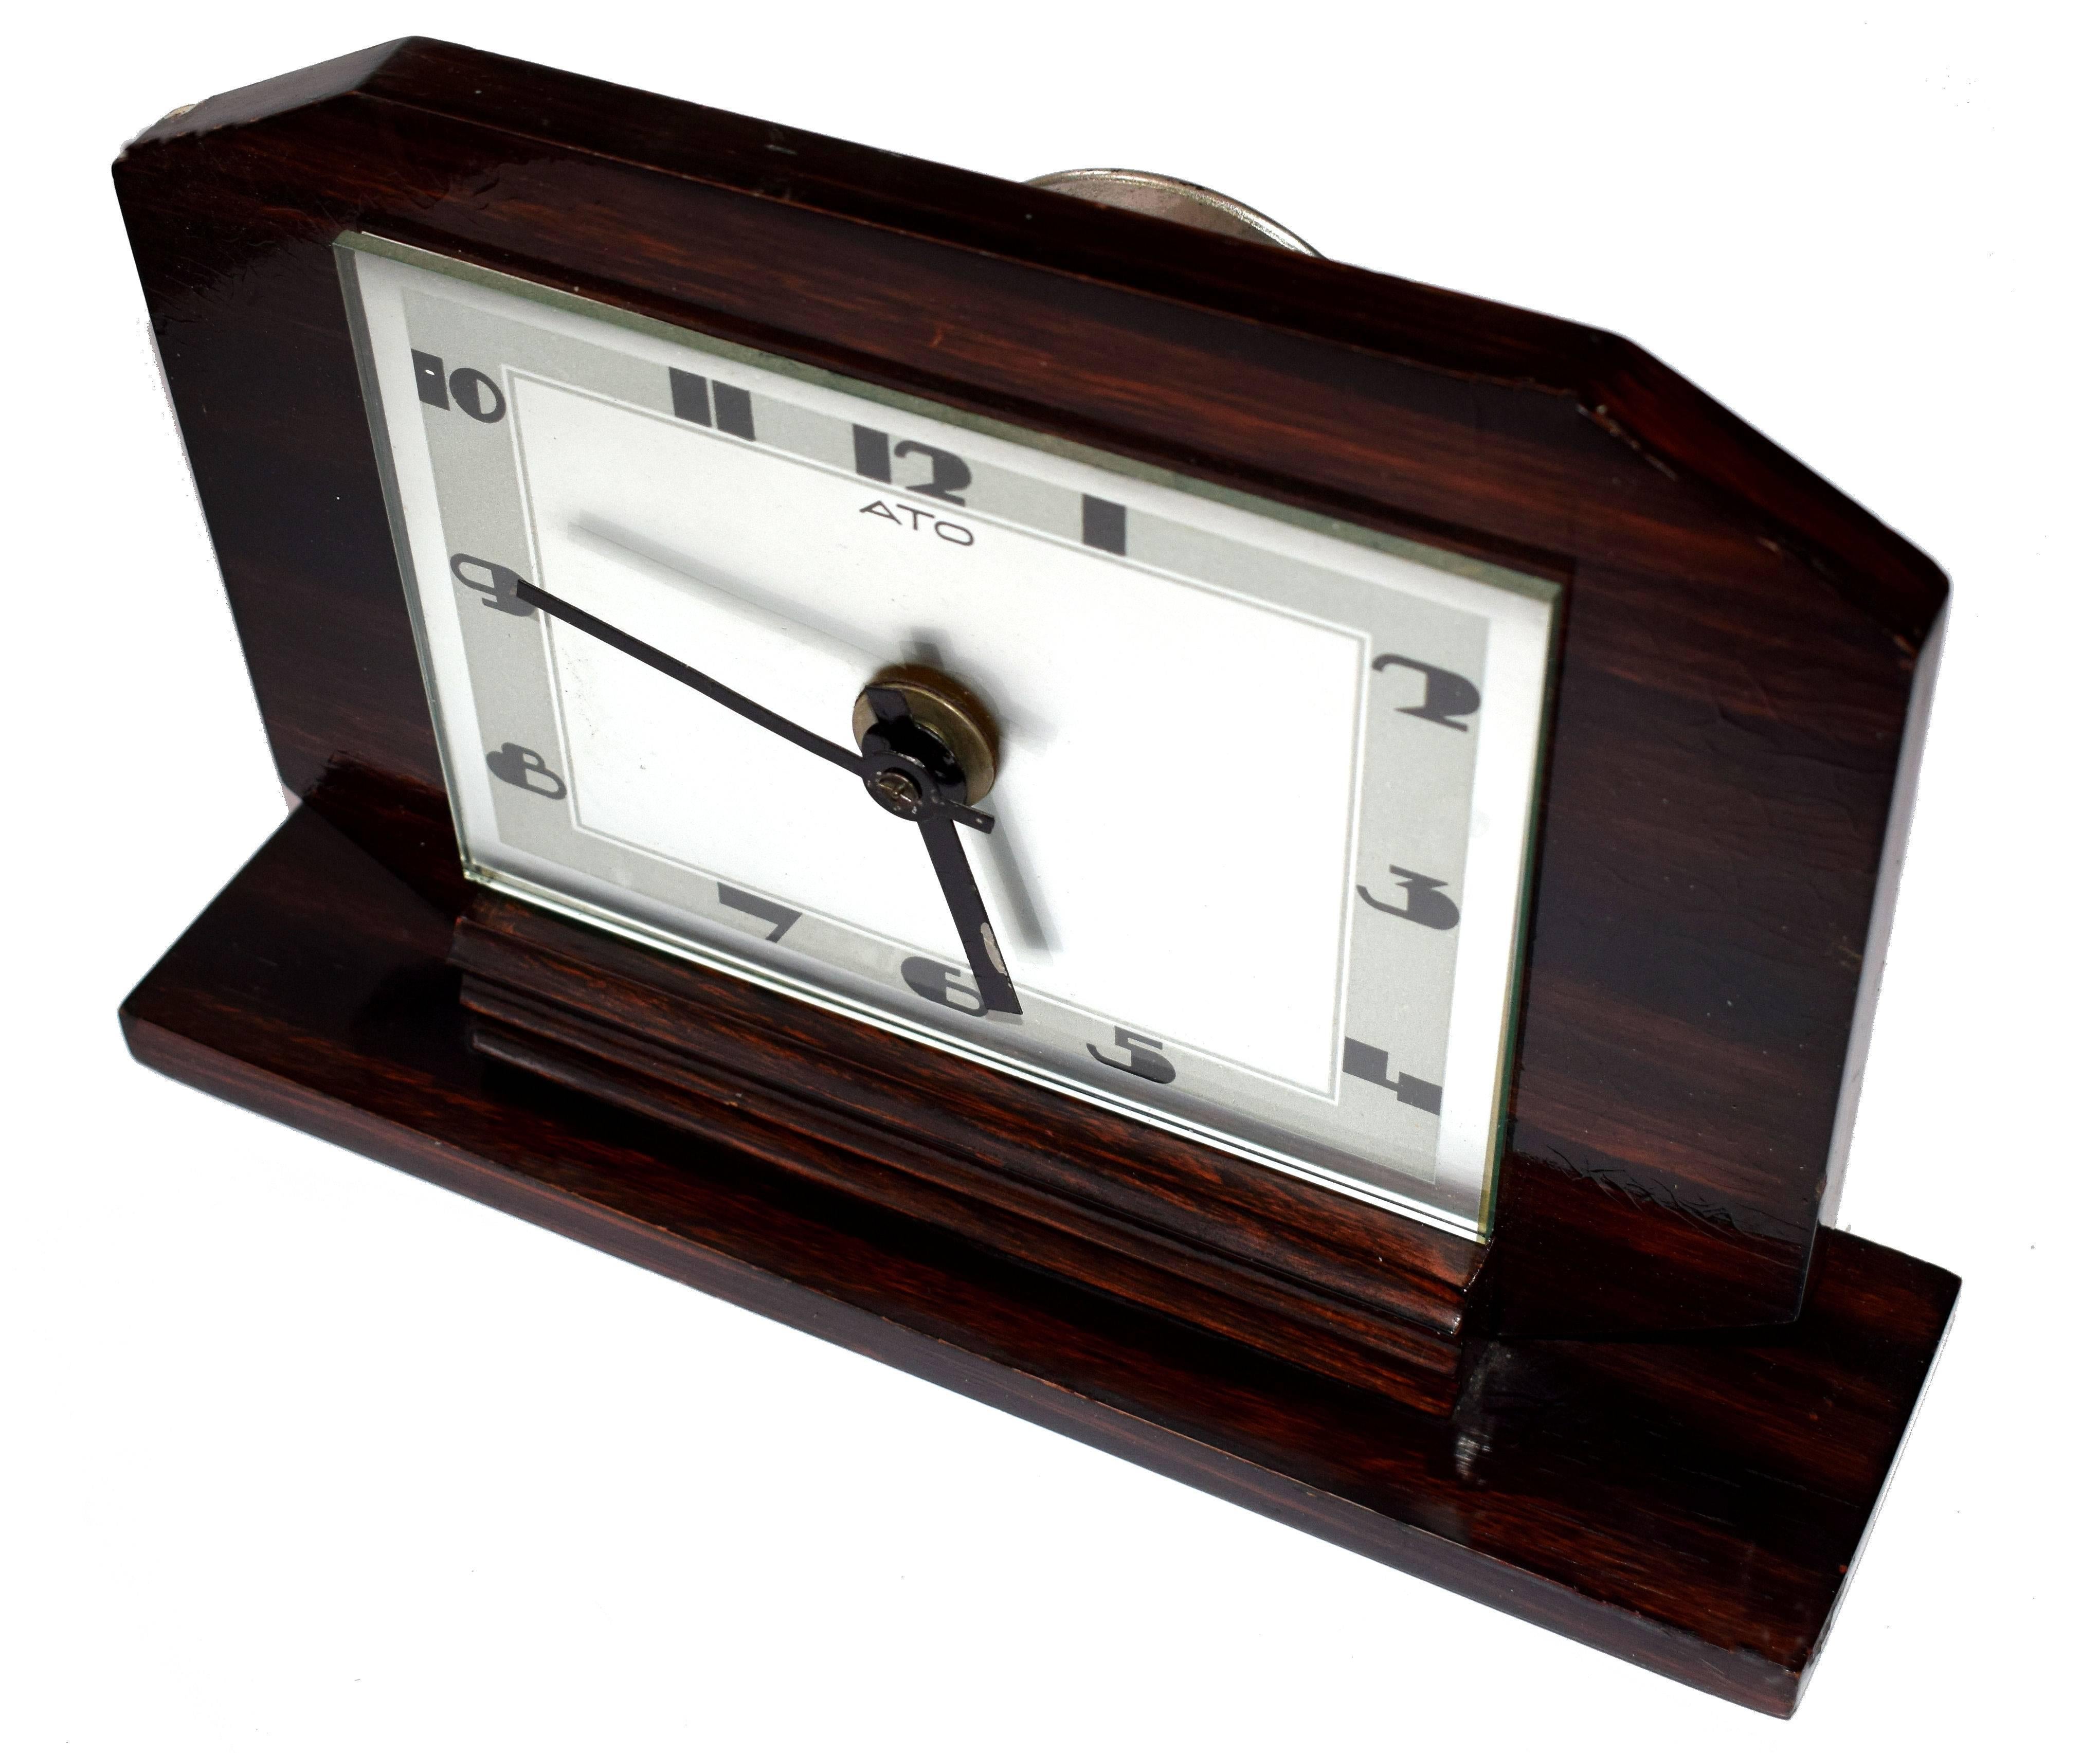 Superb 1930s Art Deco clock by the French clock makers ATO . The Macassar wood casing contrasting against the silvered dial and heavily stylised Art Deco numerals look nothing less than impressive, a clock that can't be mistaken for any other era. I